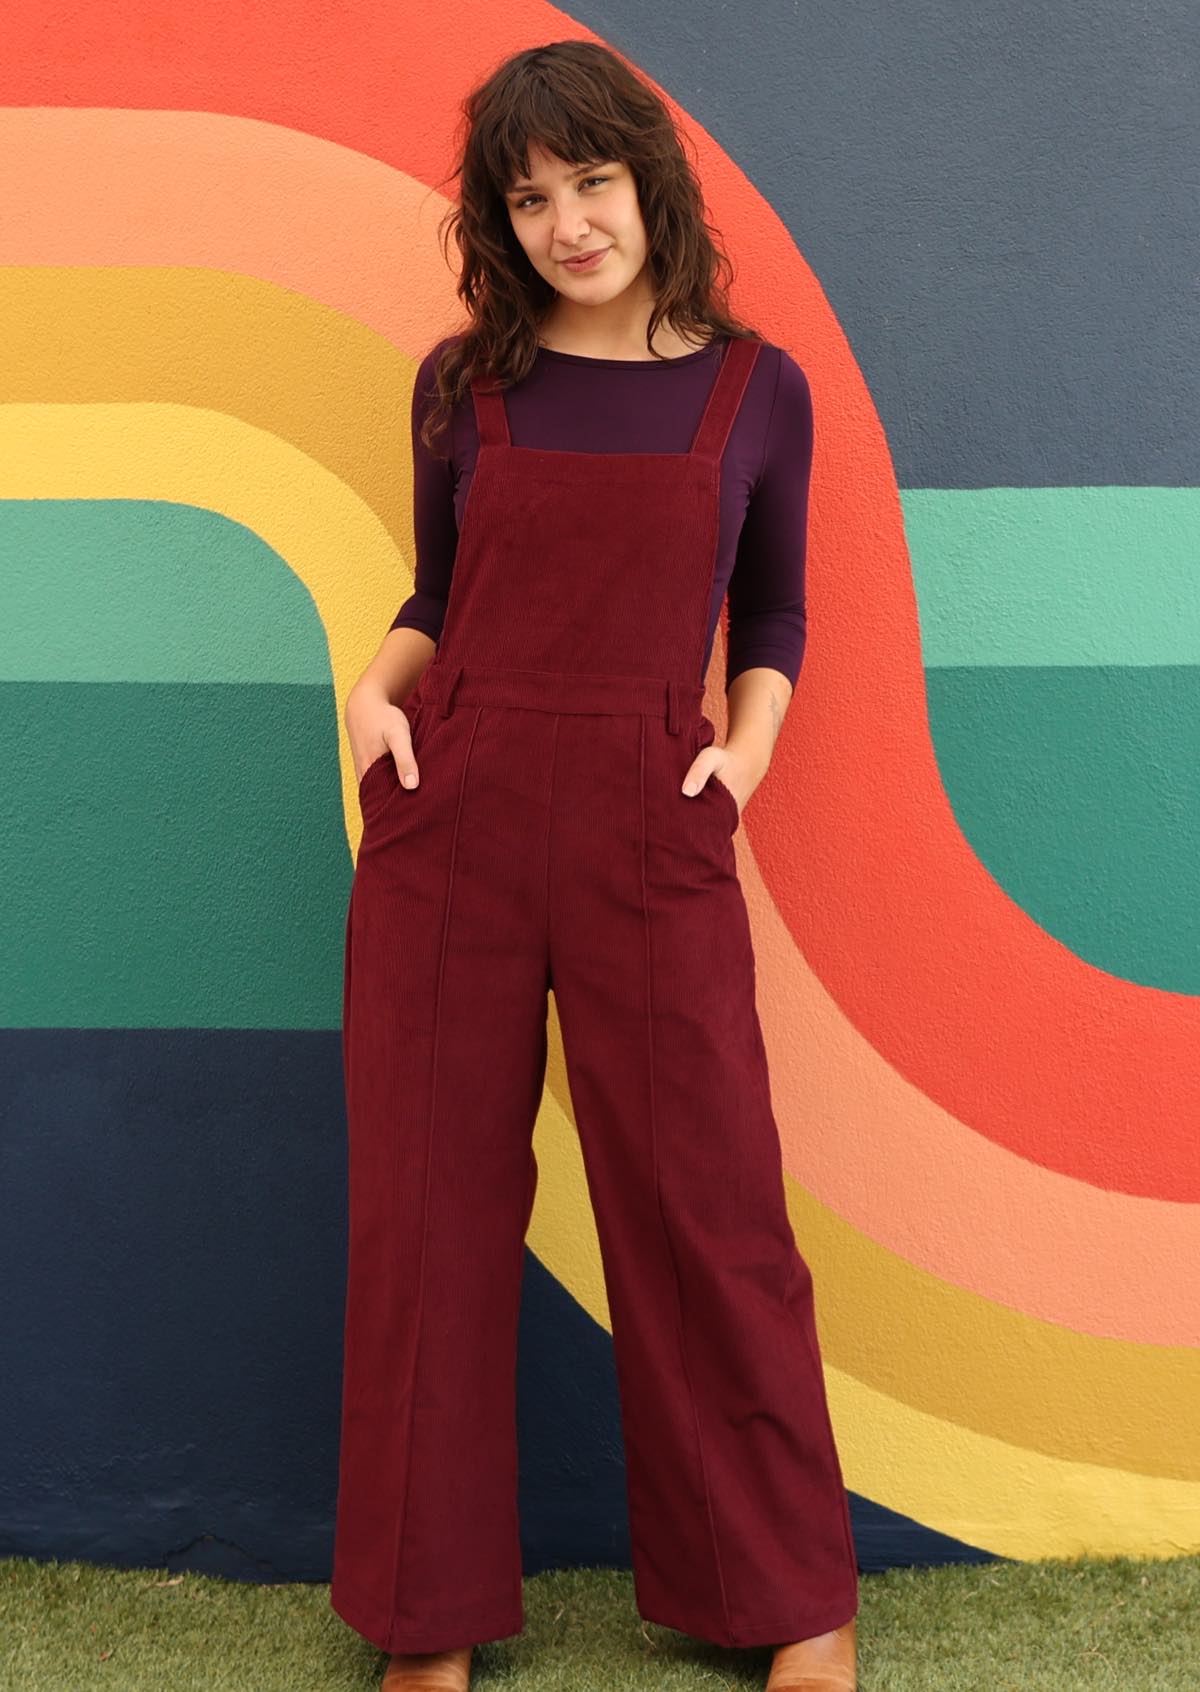 woman wearing maroon cotton corduroy overalls over long sleeved purple top, with hands in pockets